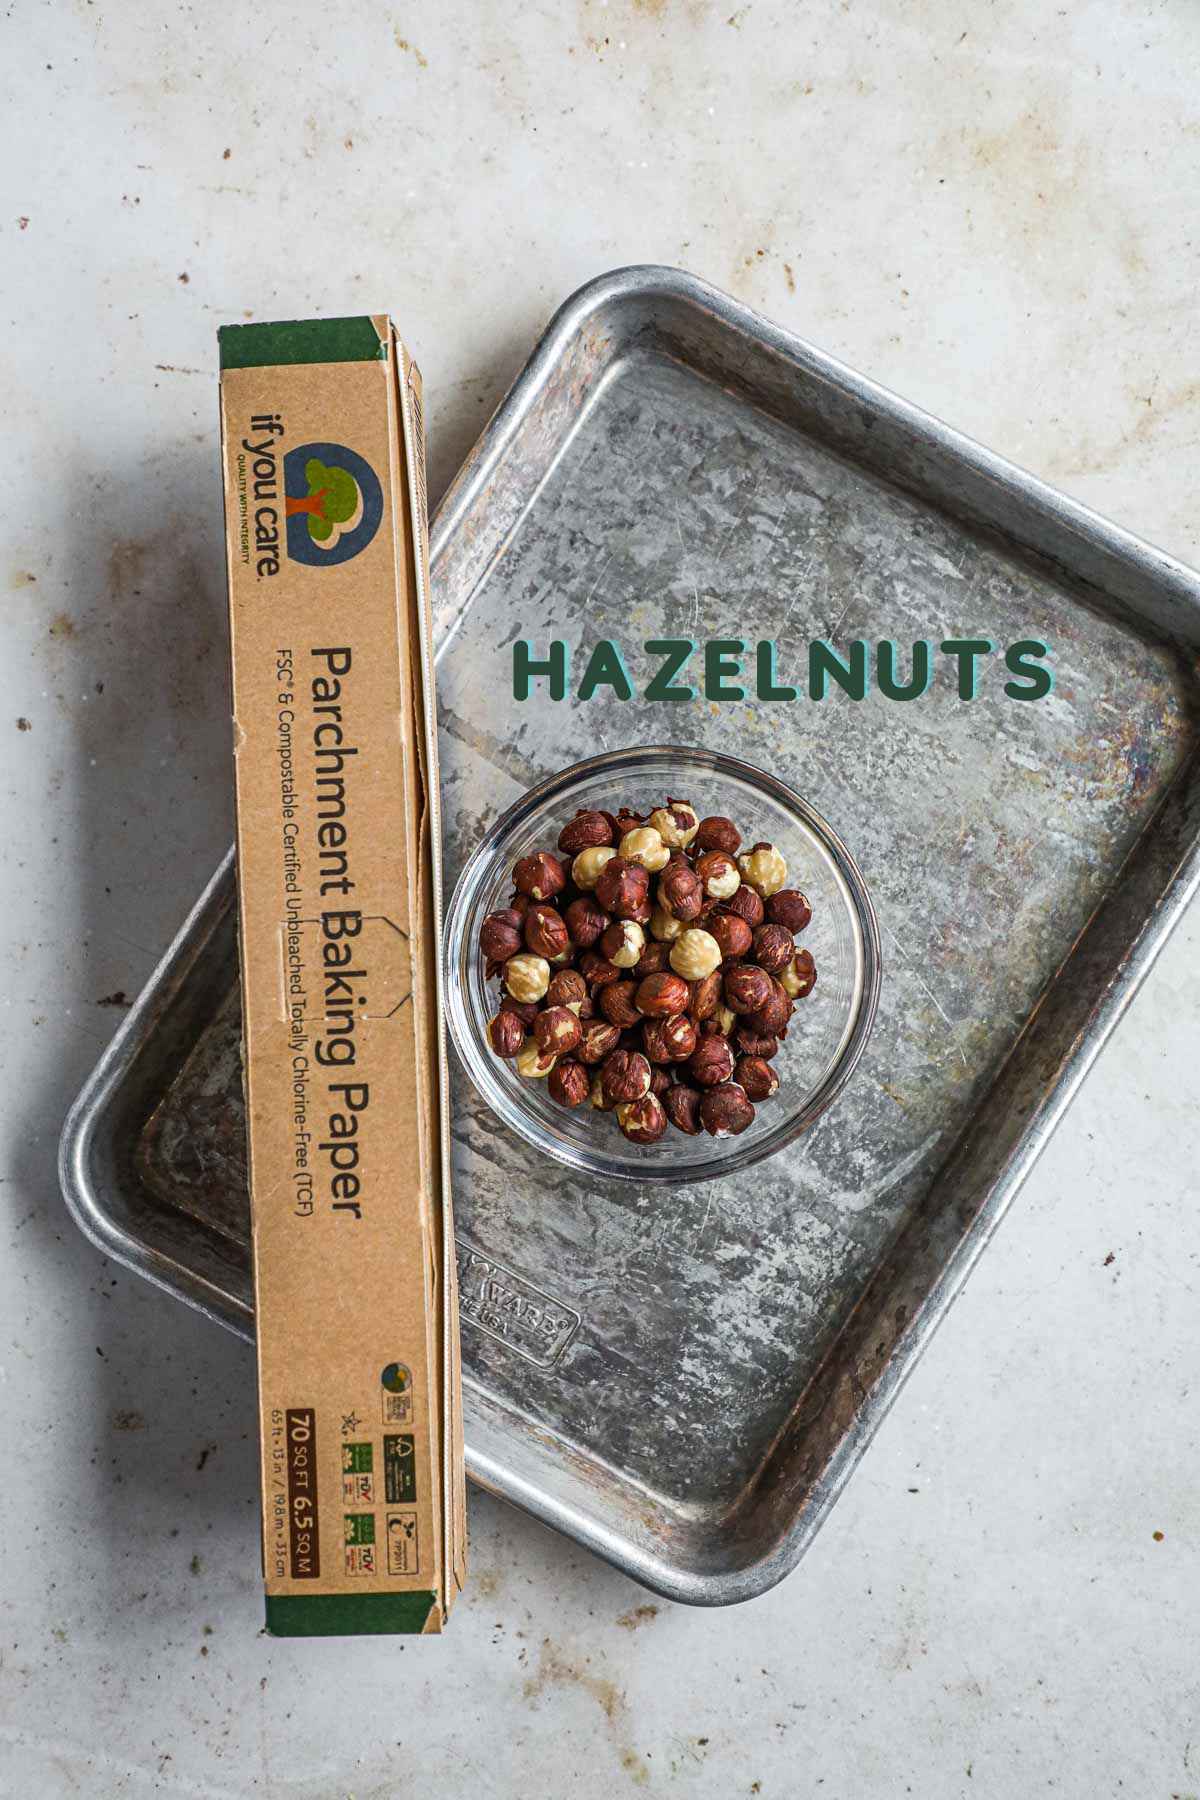 Ingredients to make roasted hazelnuts, including hazelnuts, parchment paper, and a sheet pan or a skillet.